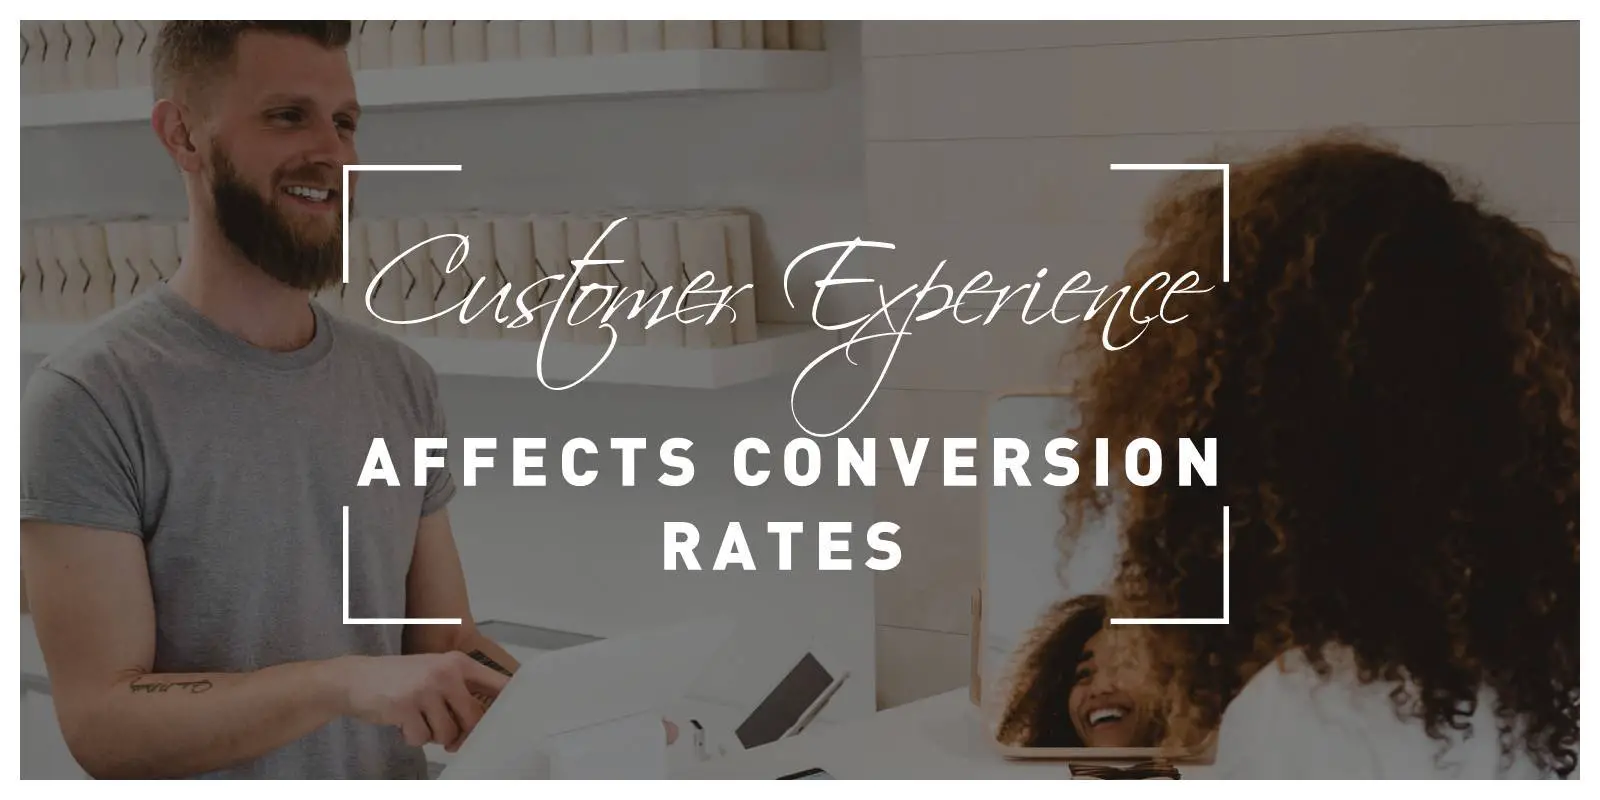 Here’s How Customer Experience Affects Conversion Rates and How to Improve It